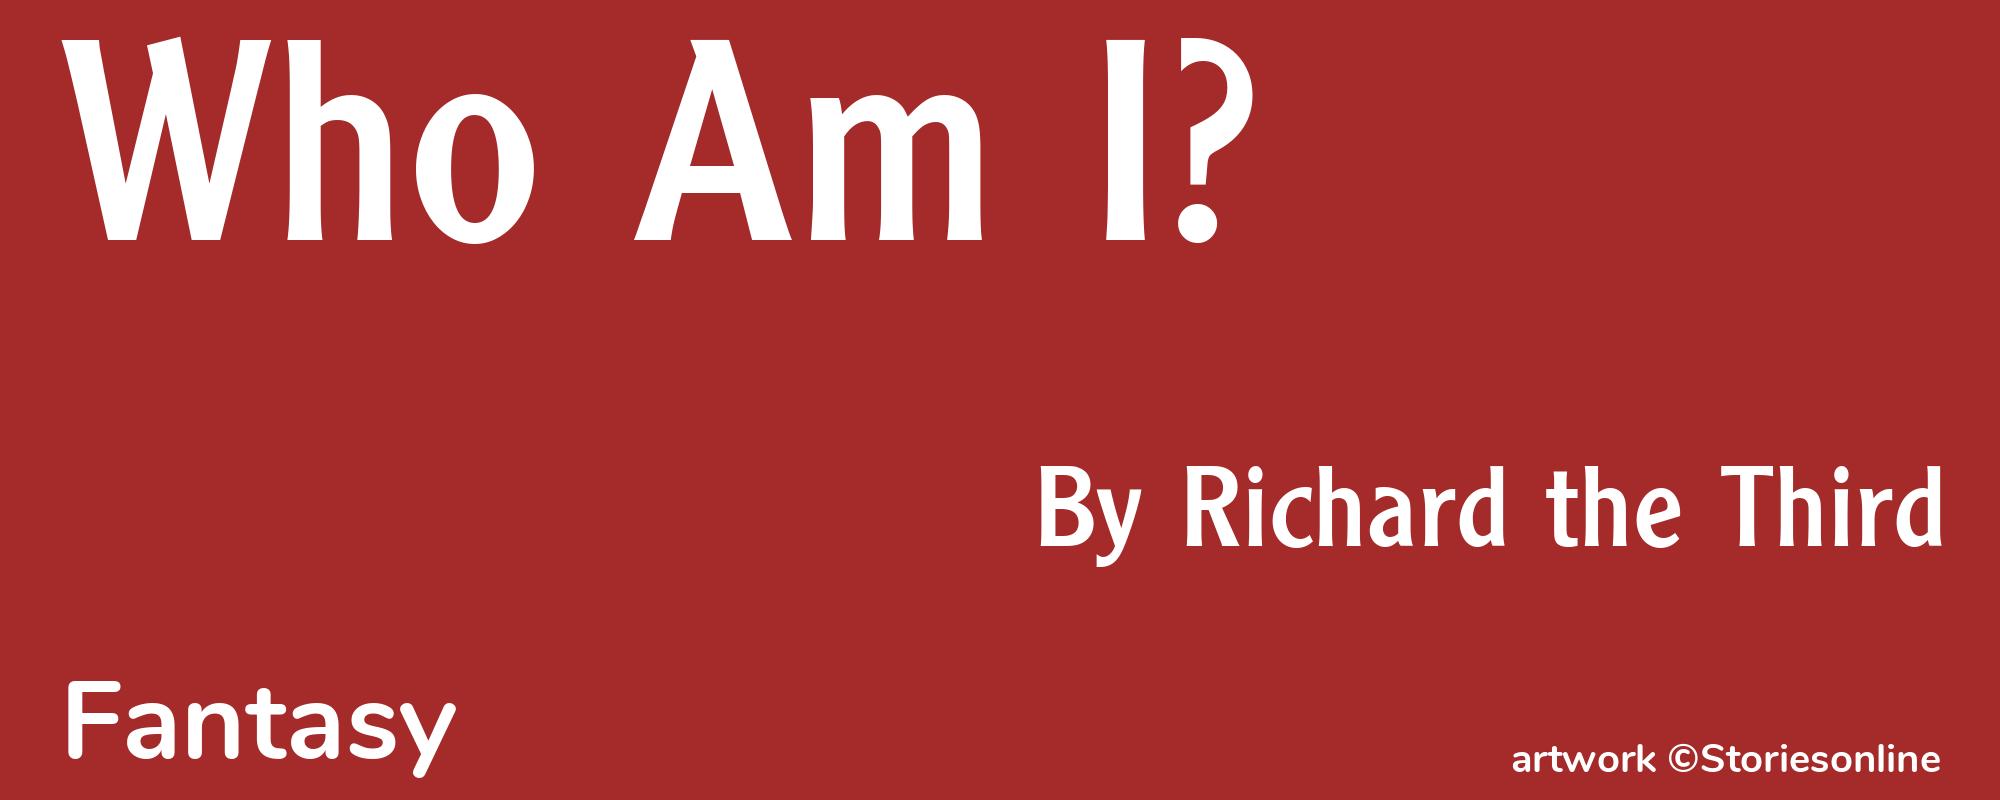 Who Am I? - Cover